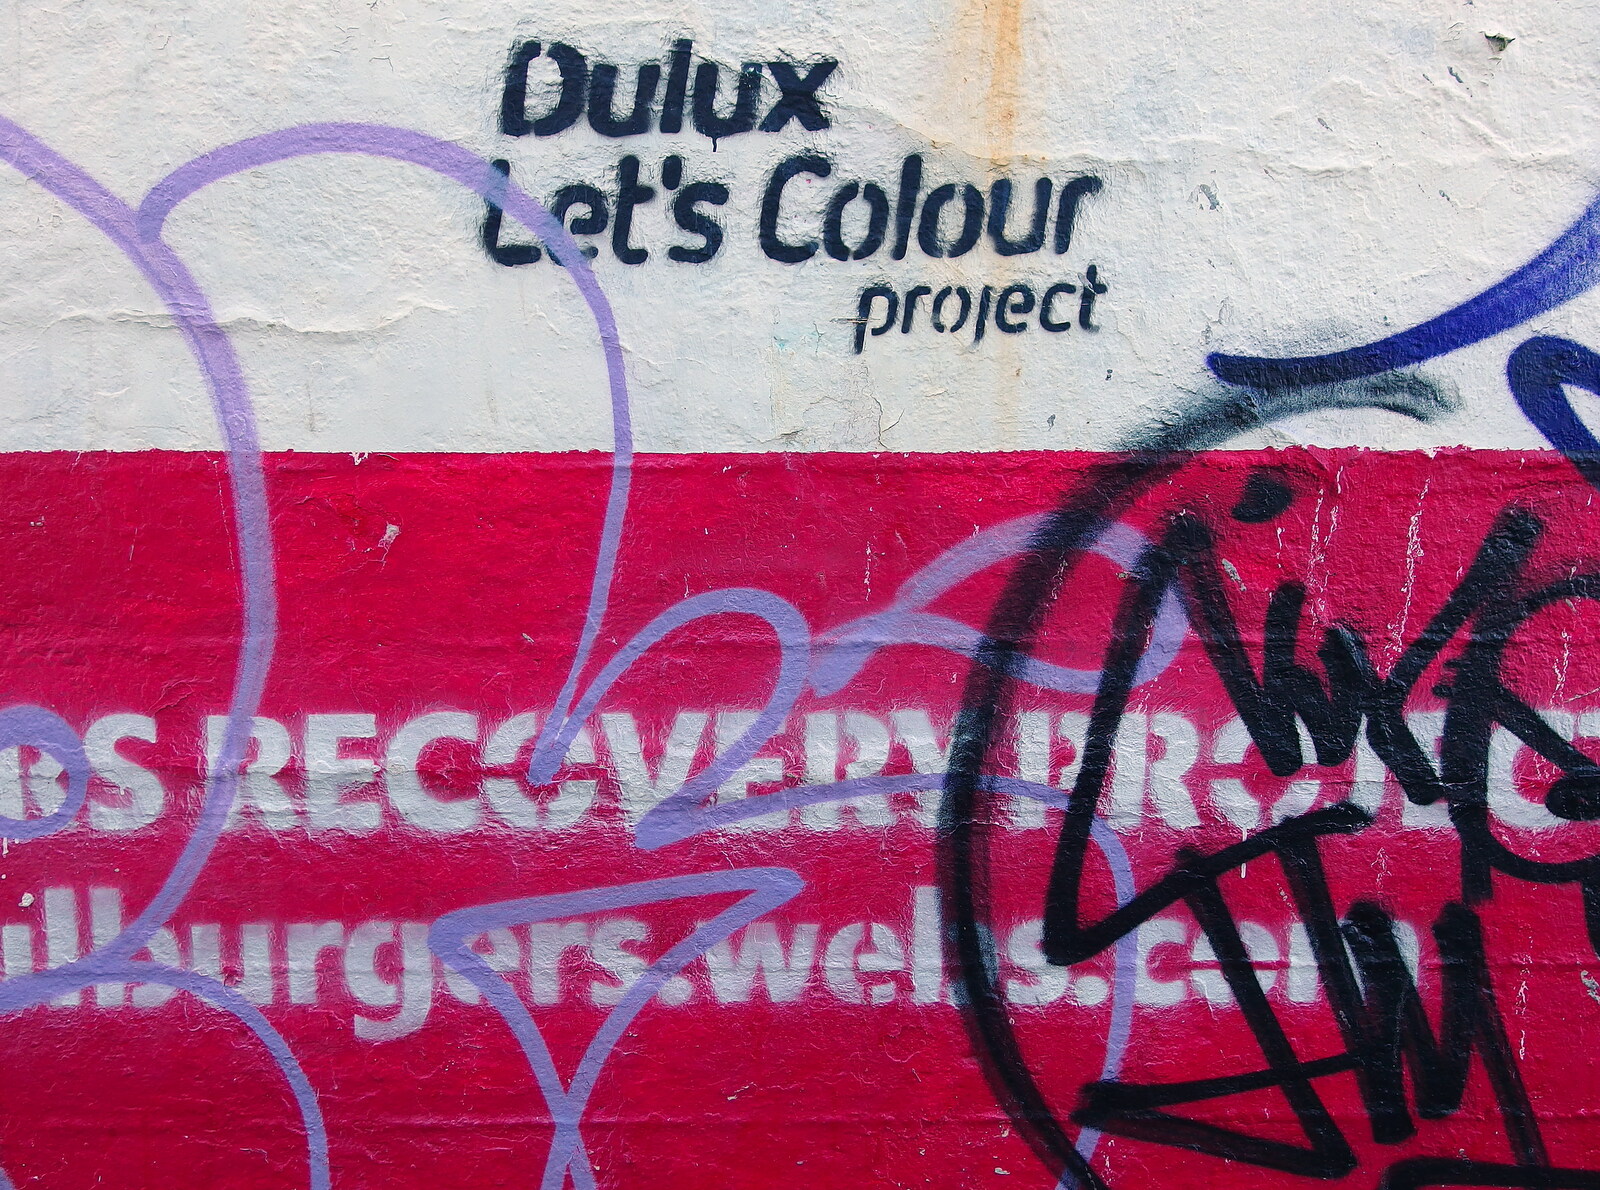 Dulux Let's Colour Project graffiti from A Trip to Monkstown Farm and Blackrock, County Dublin, Ireland - 2nd January 2014